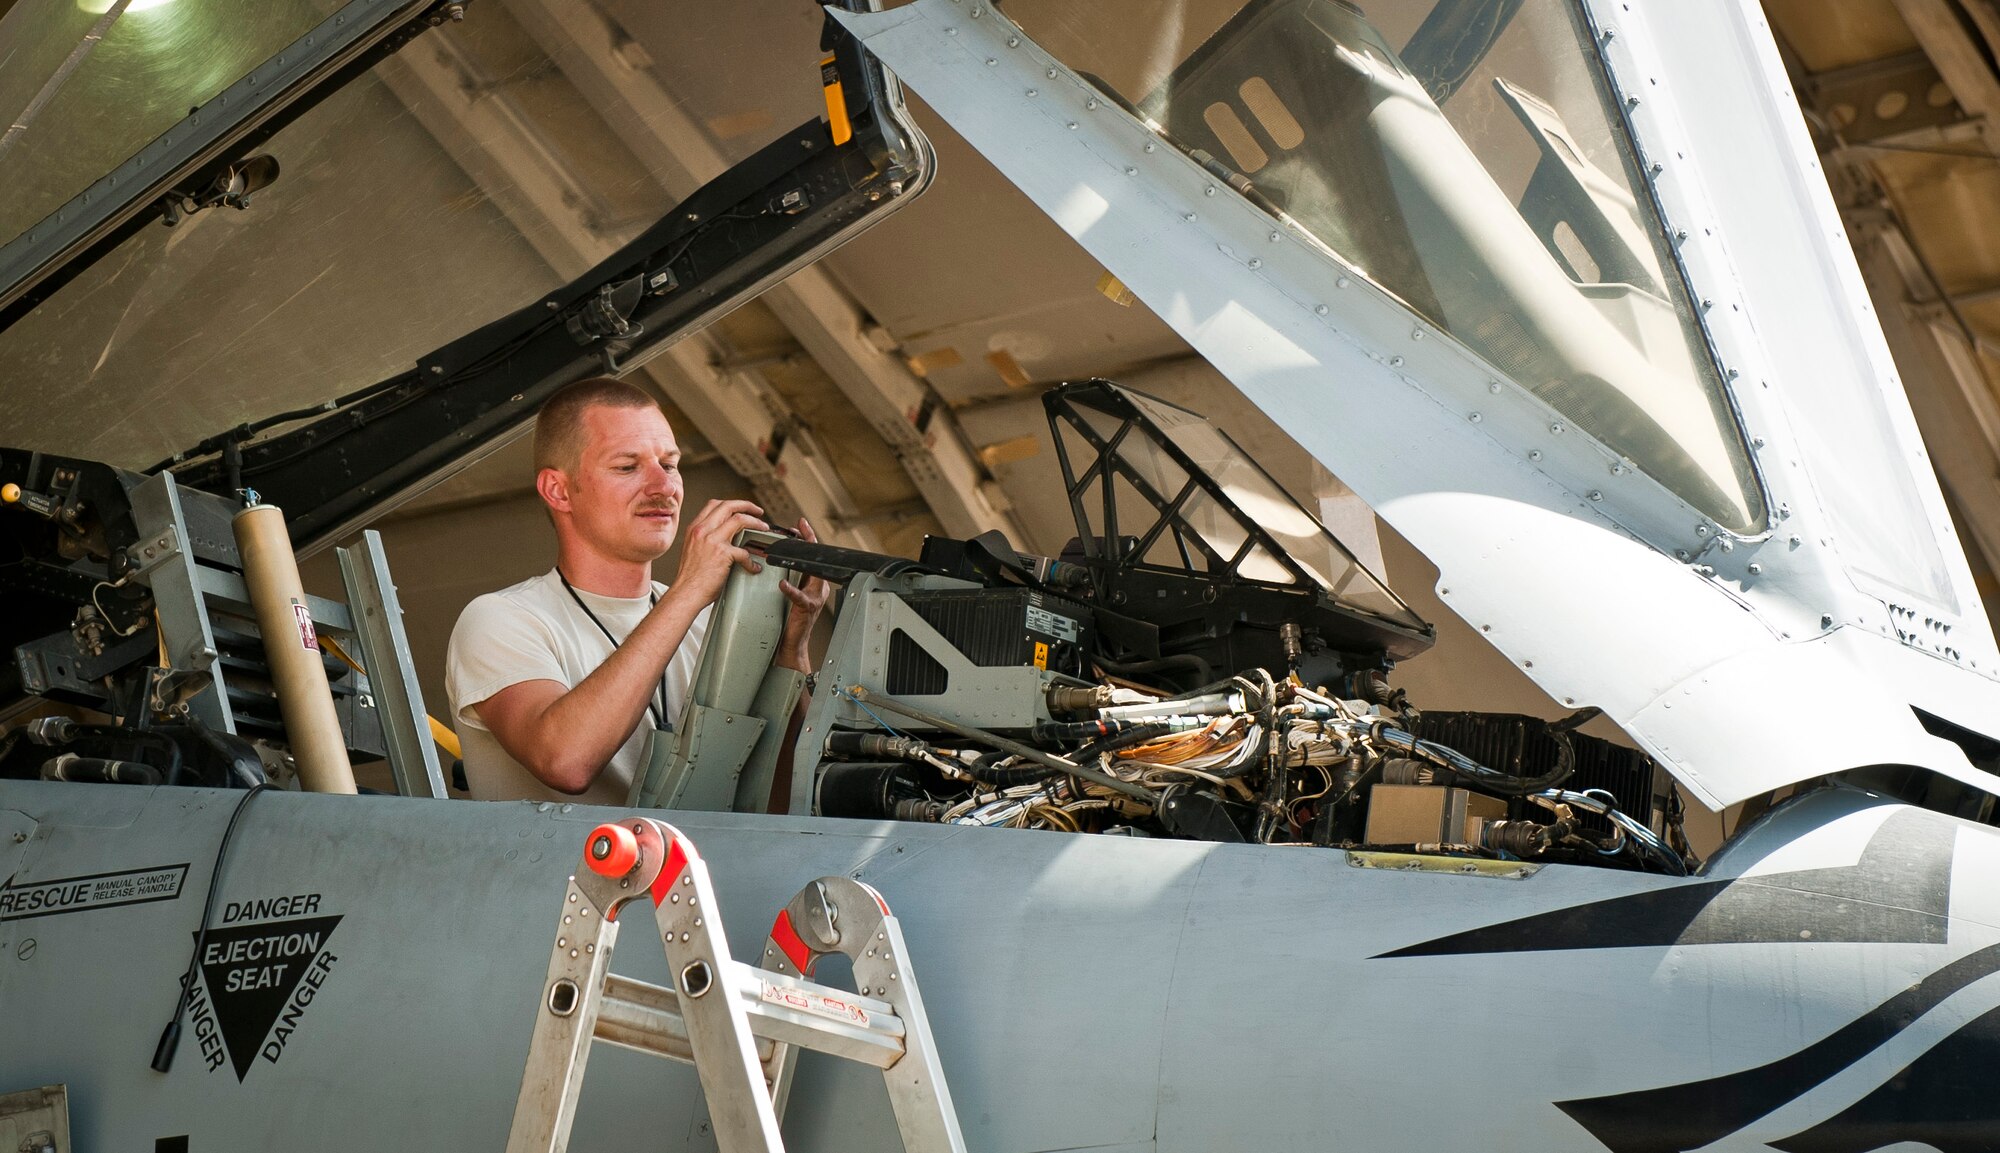 TSgt Robert Haag, an aircraft phase maintenance specialist with the 455th Expeditionary Maintenance Squadron, works in the cockpit of a U.S. Air Force A-10 Thunderbolt II during phase maintenance at Bagram Airfield, Afghanistan, August 9, 2012. The Airmen adhere to a strict schedule of maintenance to keep Bagram’s aircraft safe and operational. (U.S. Air Force Photo/Capt. Raymond Geoffroy)